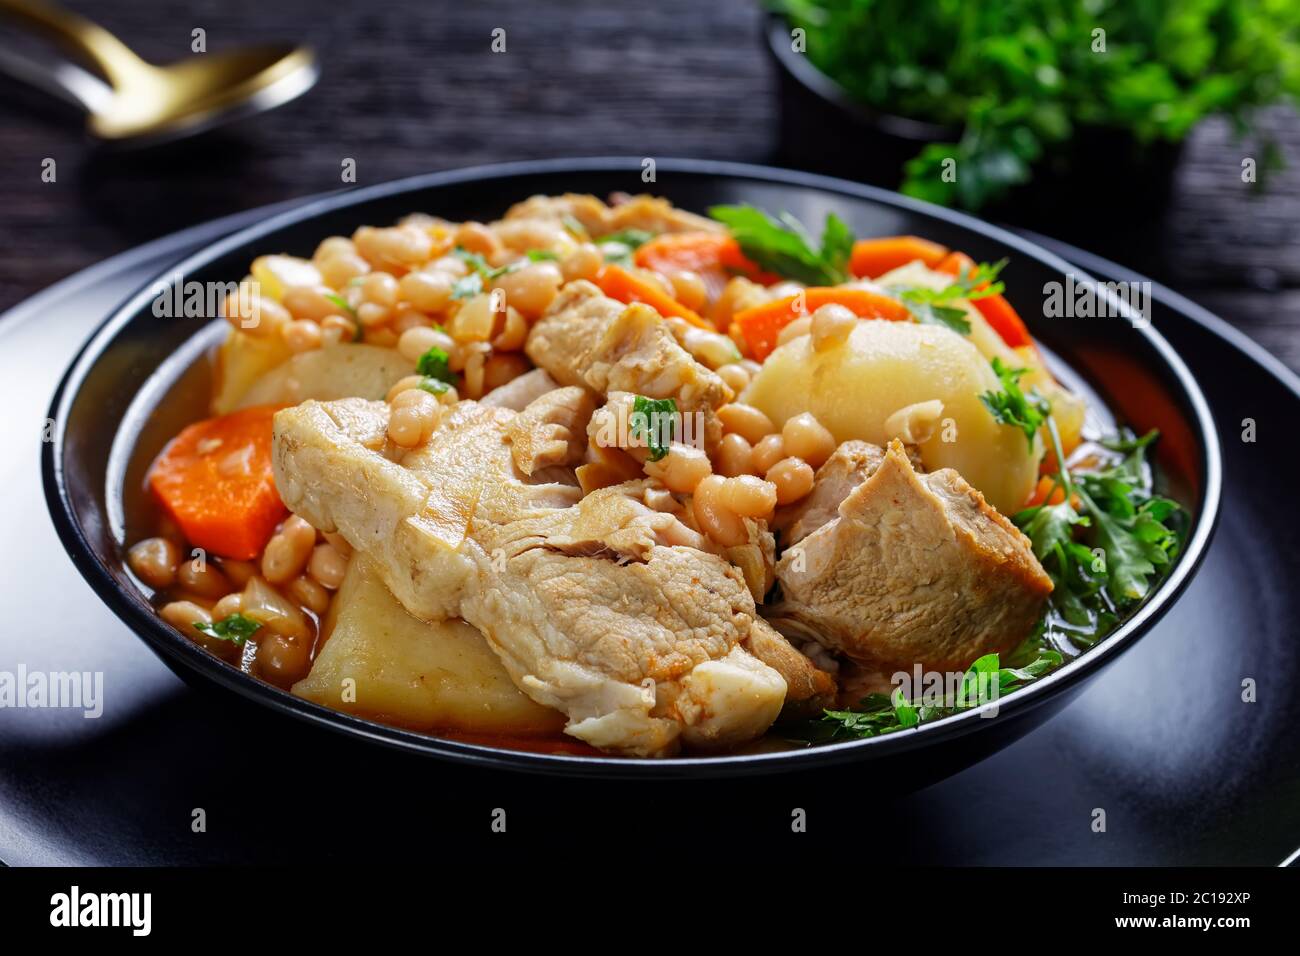 close-up of a portion of white bean, vegetables and pork steak stew in a black bowl on a dark wooden table Stock Photo